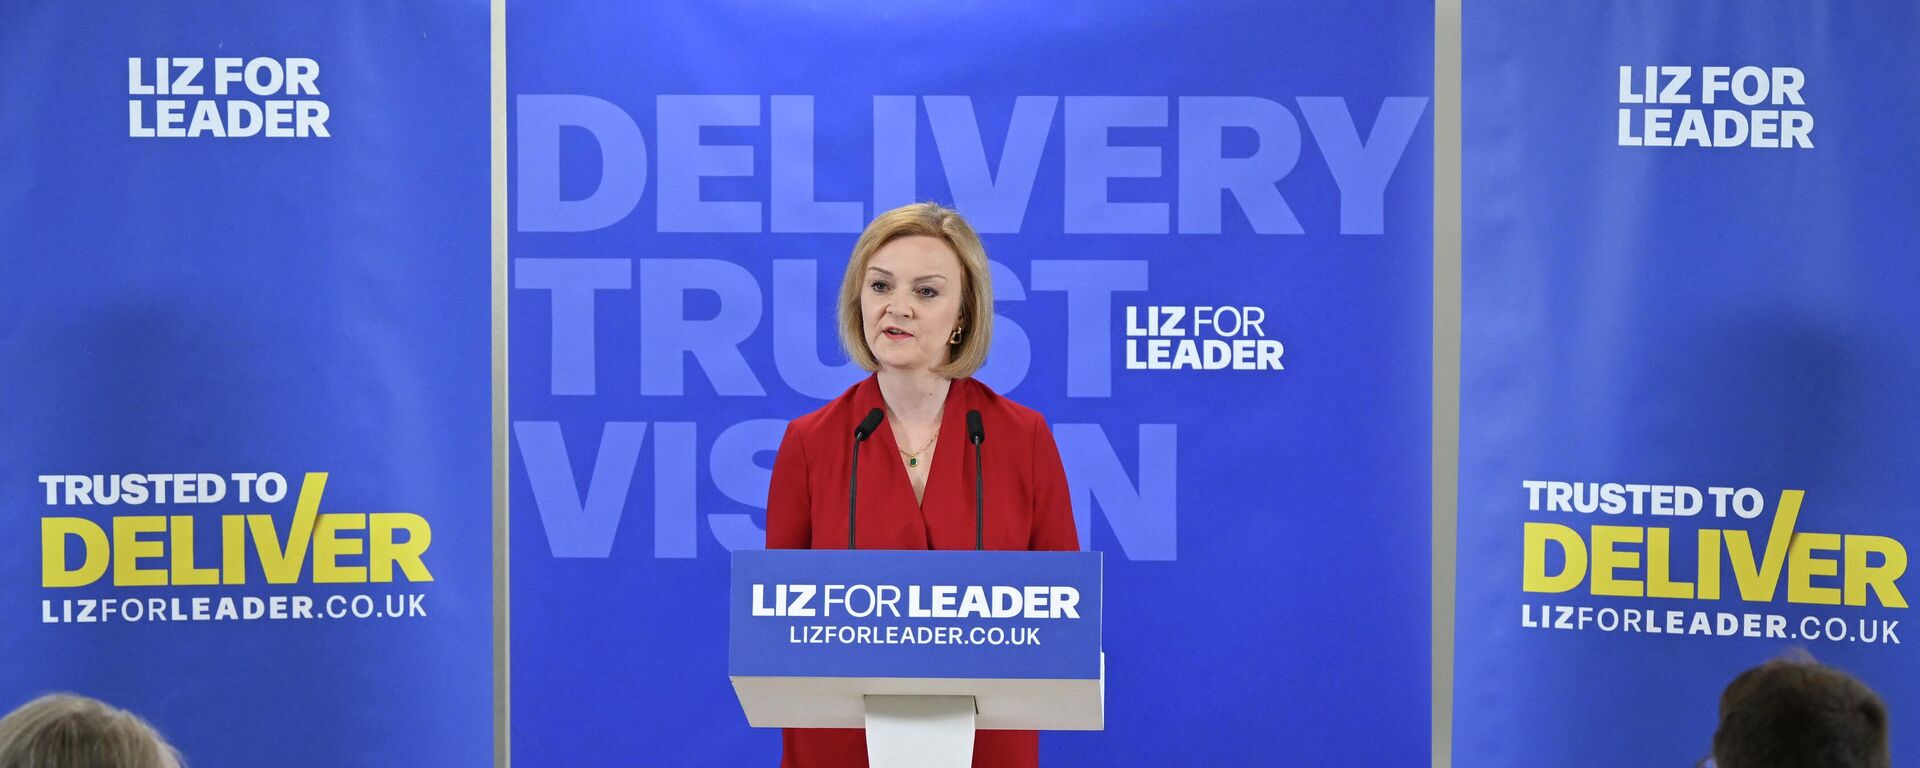 Britain's Foreign Secretary Liz Truss delivers a speech at the launch of her campaign to become the next leader of the Conservative party in London on July 14, 2022. - - Sputnik International, 1920, 21.07.2022